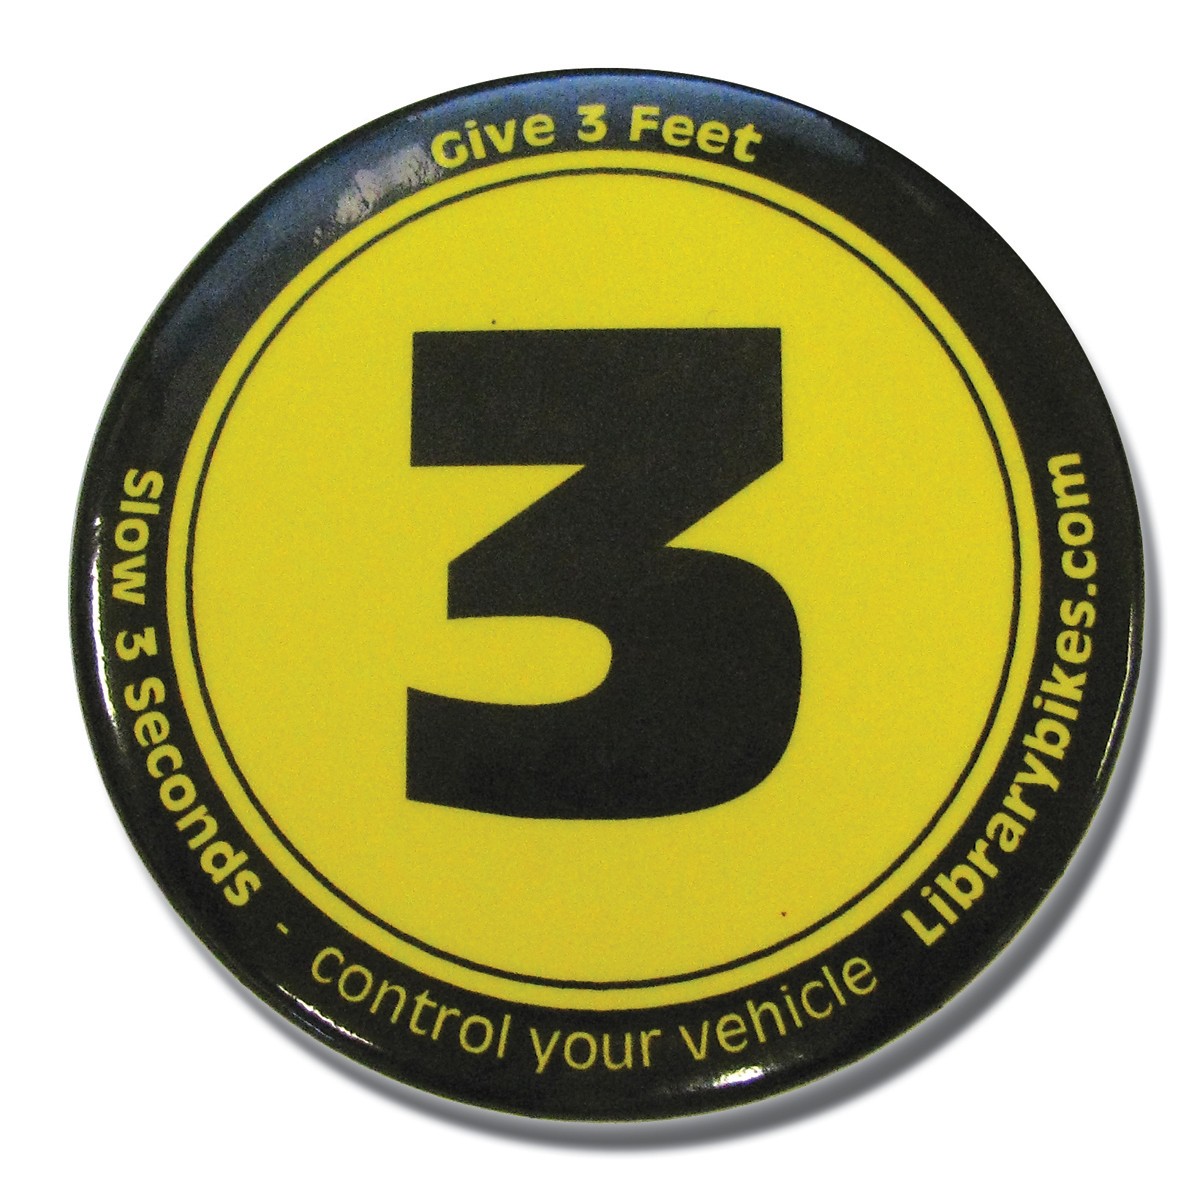 Button promoting three feet for safety - PHOTO BY HOLLY HARVEY